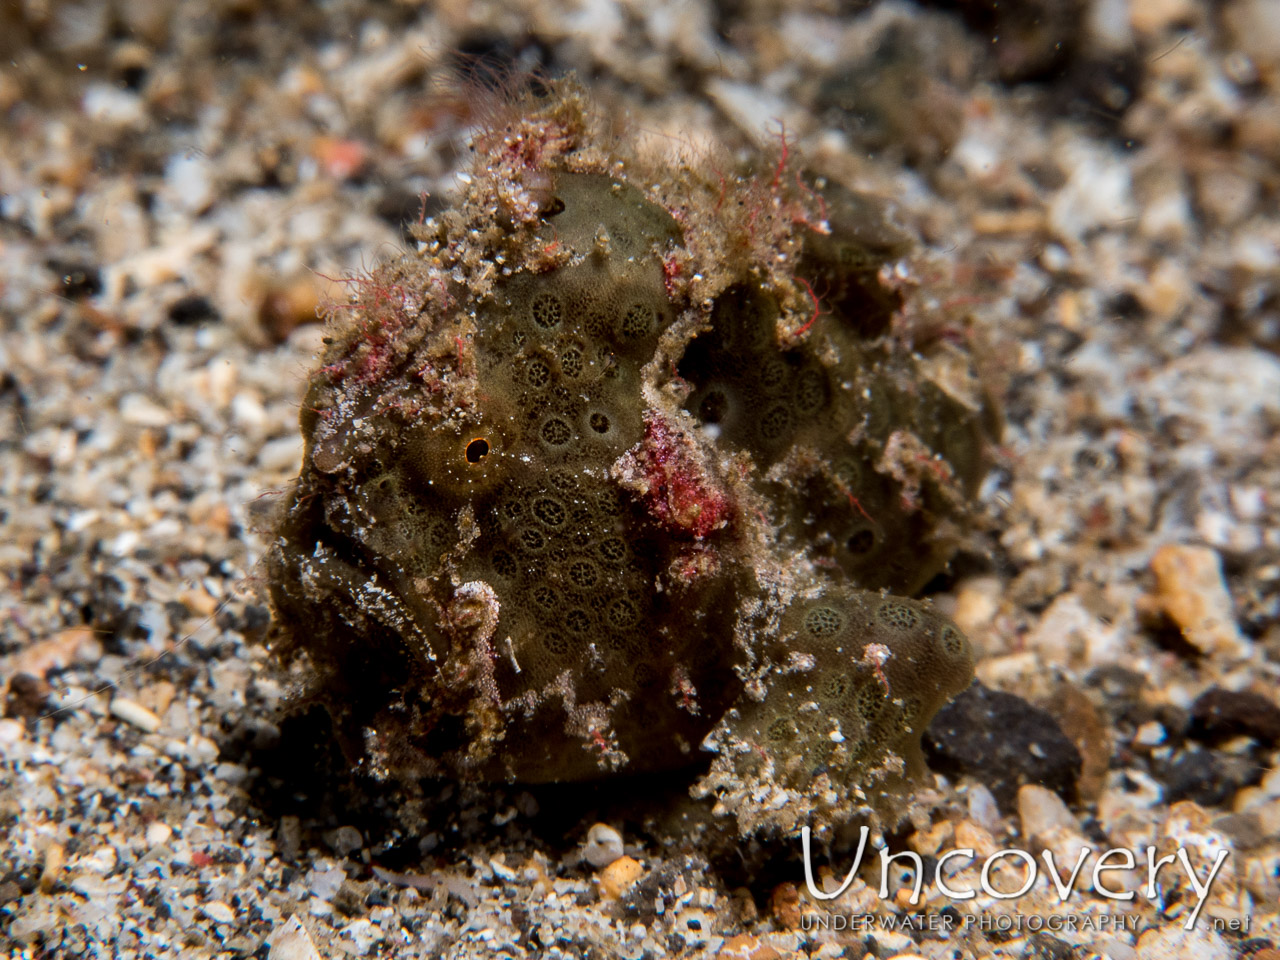 Painted Frogfish (antennarius Pictus), photo taken in Indonesia, North Sulawesi, Lembeh Strait, Critter Hunt